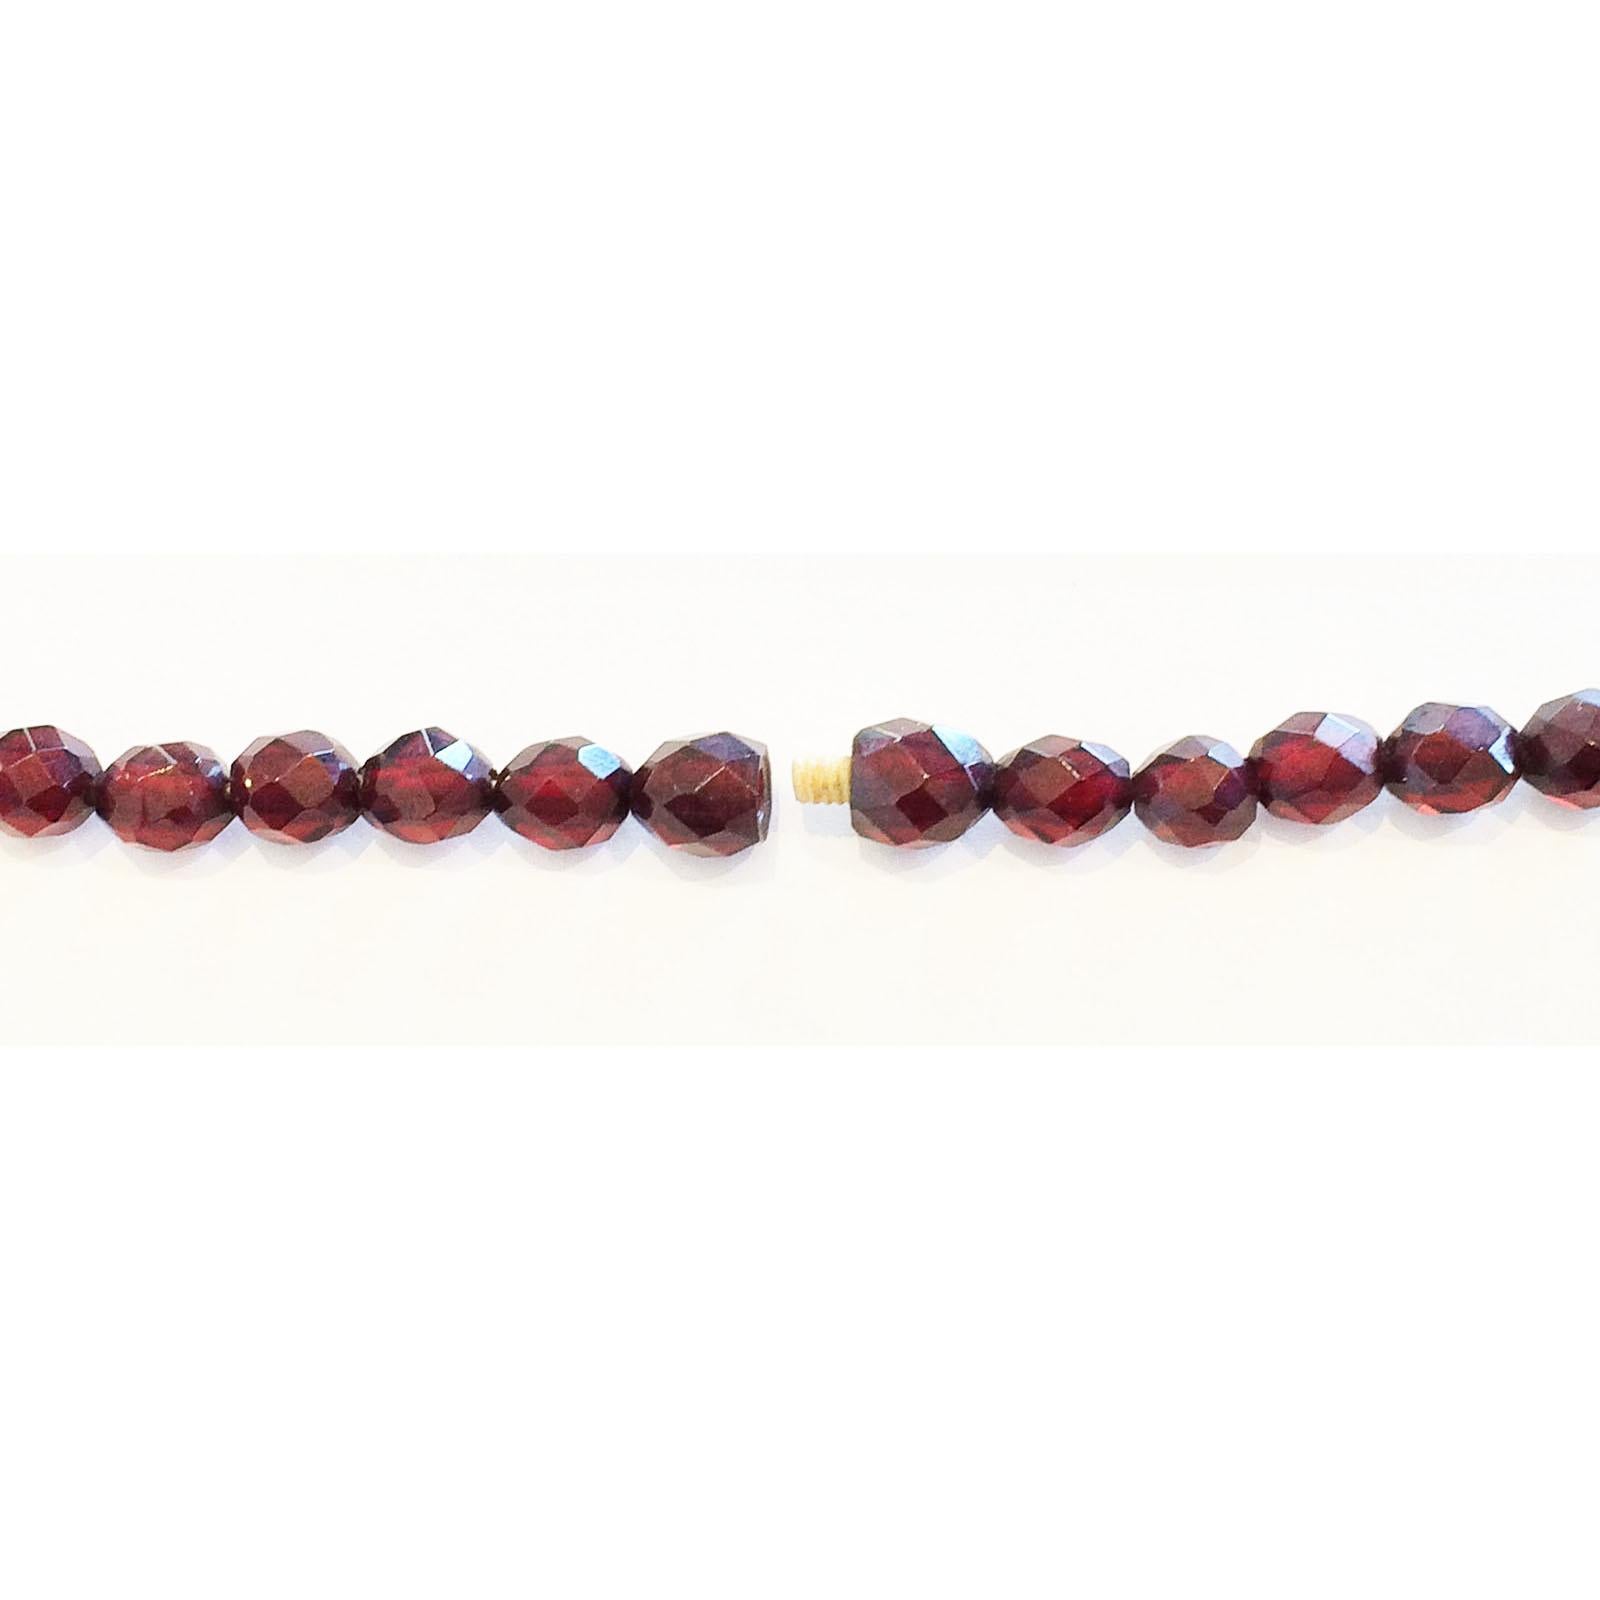 Women's Long Art Deco Cherry Amber faceted bead necklace